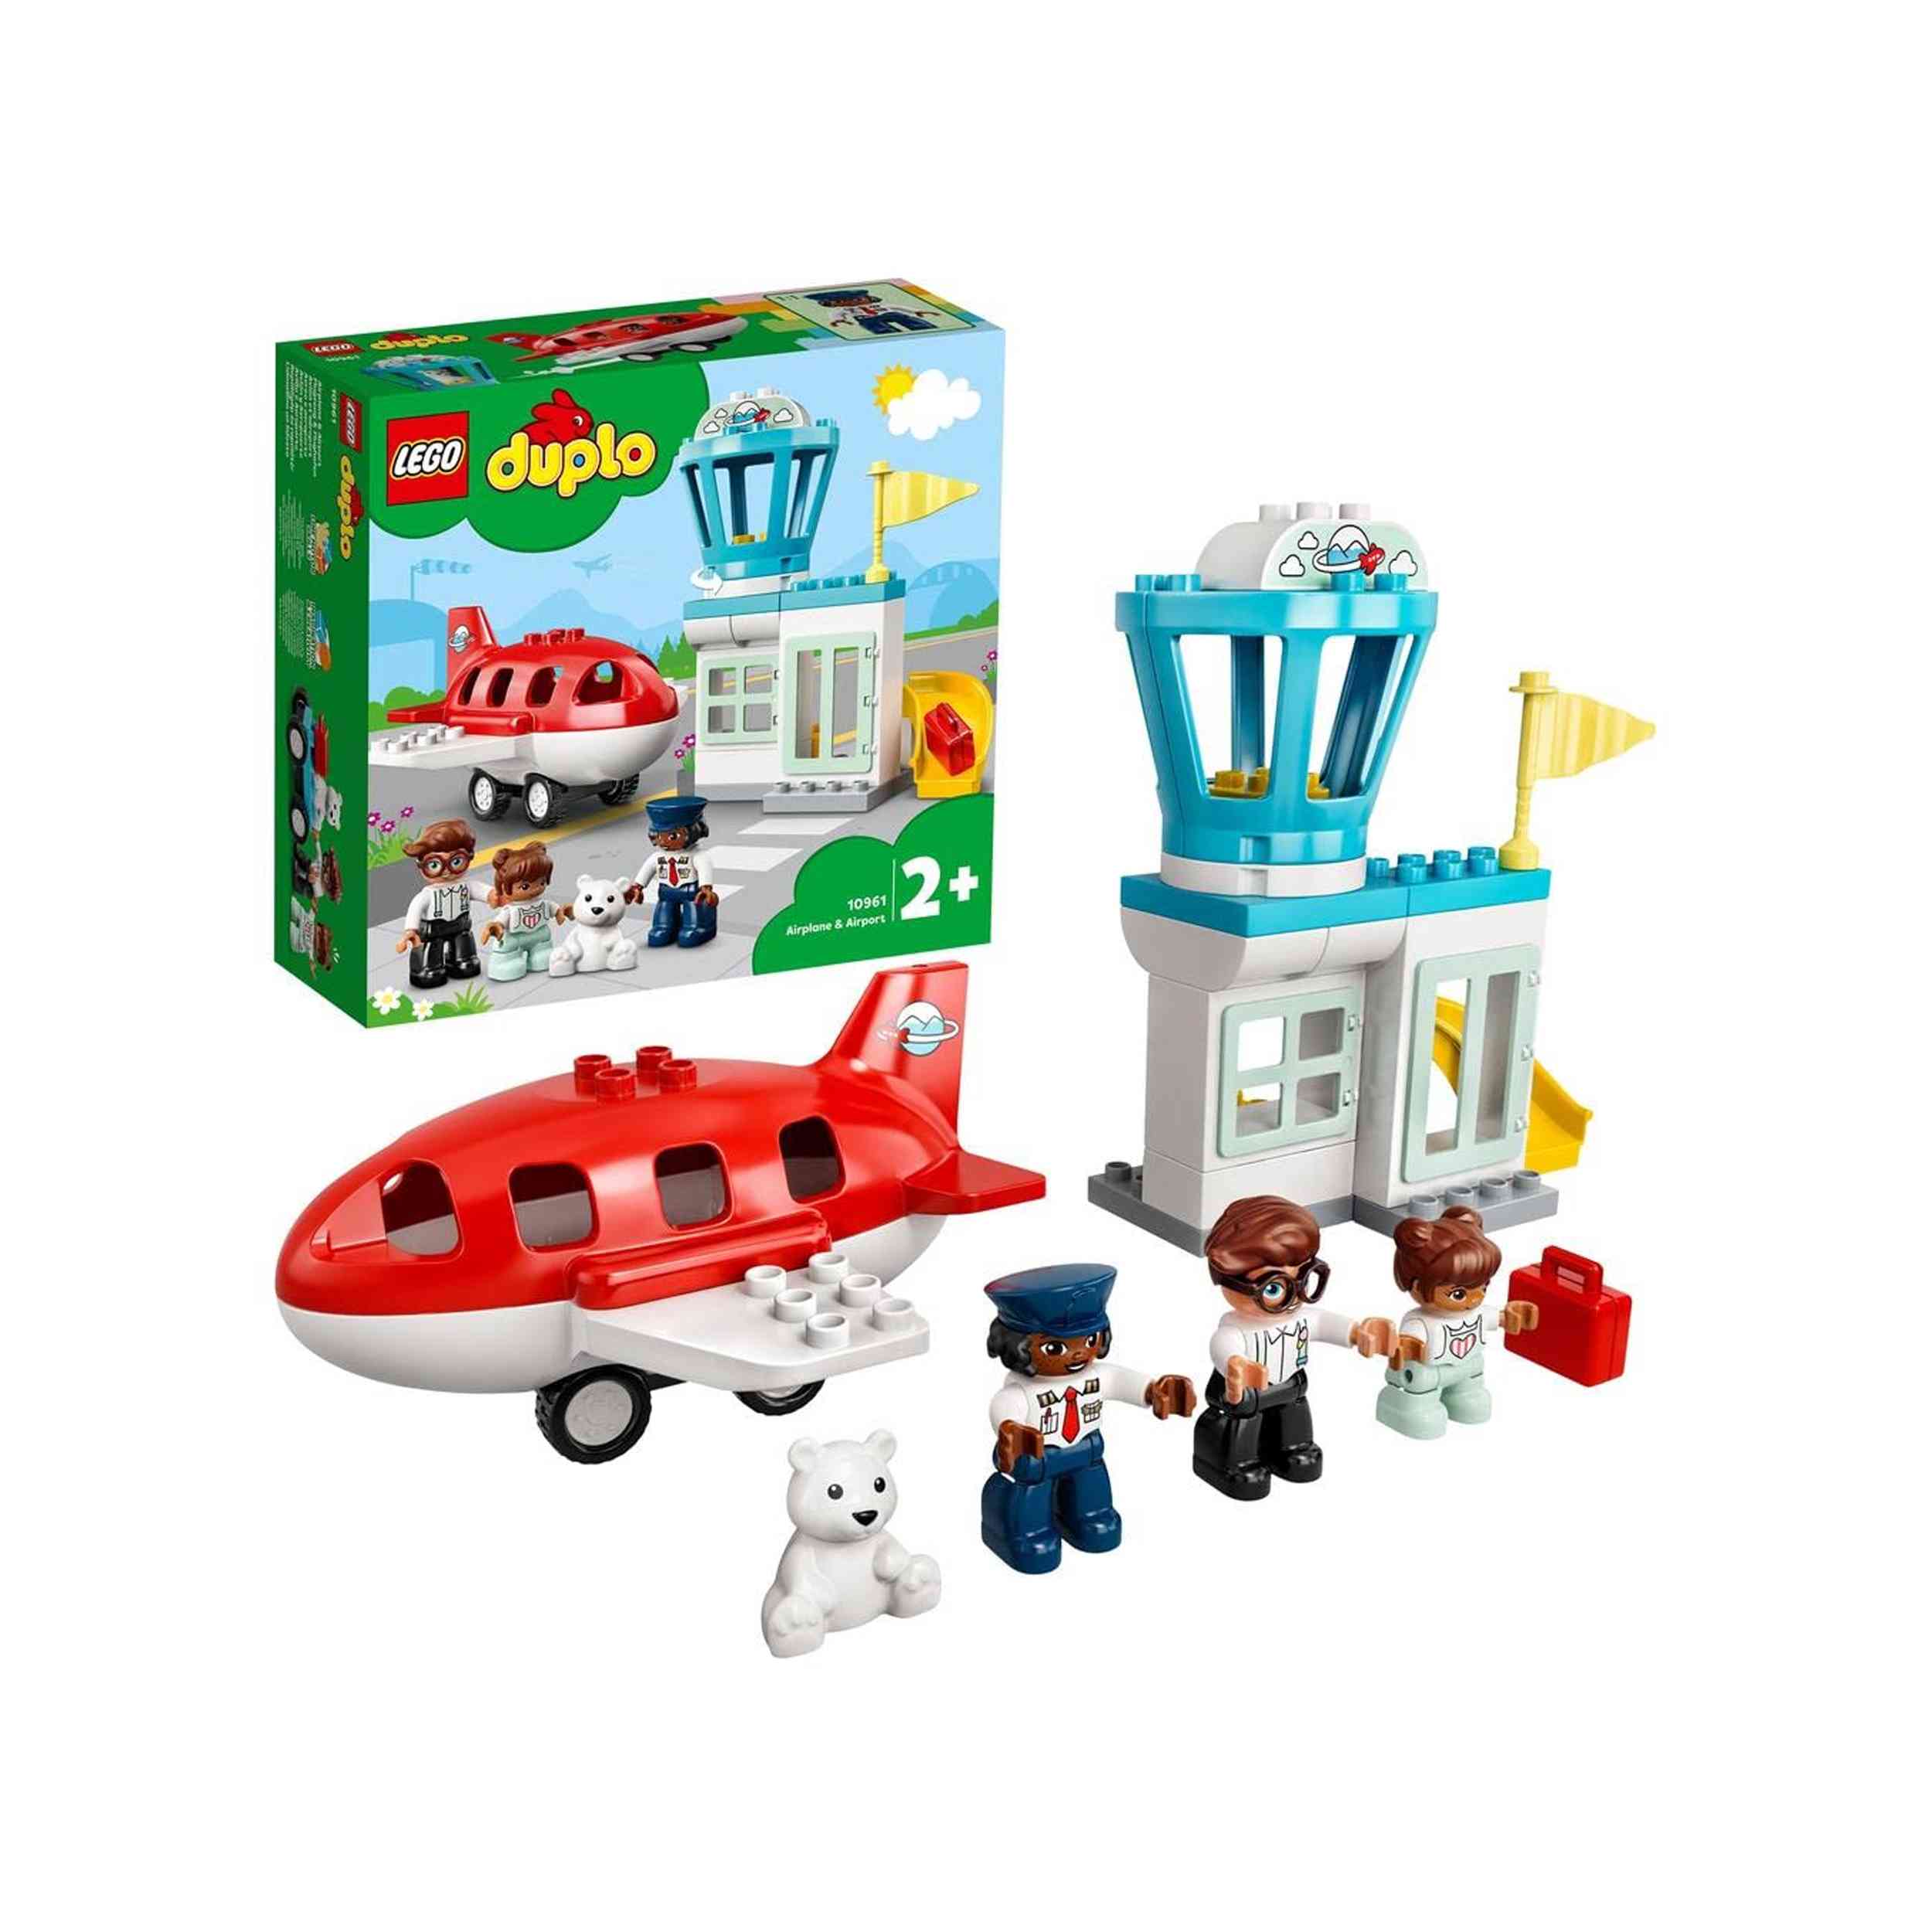 Lego Duplo - Airplane And Airport